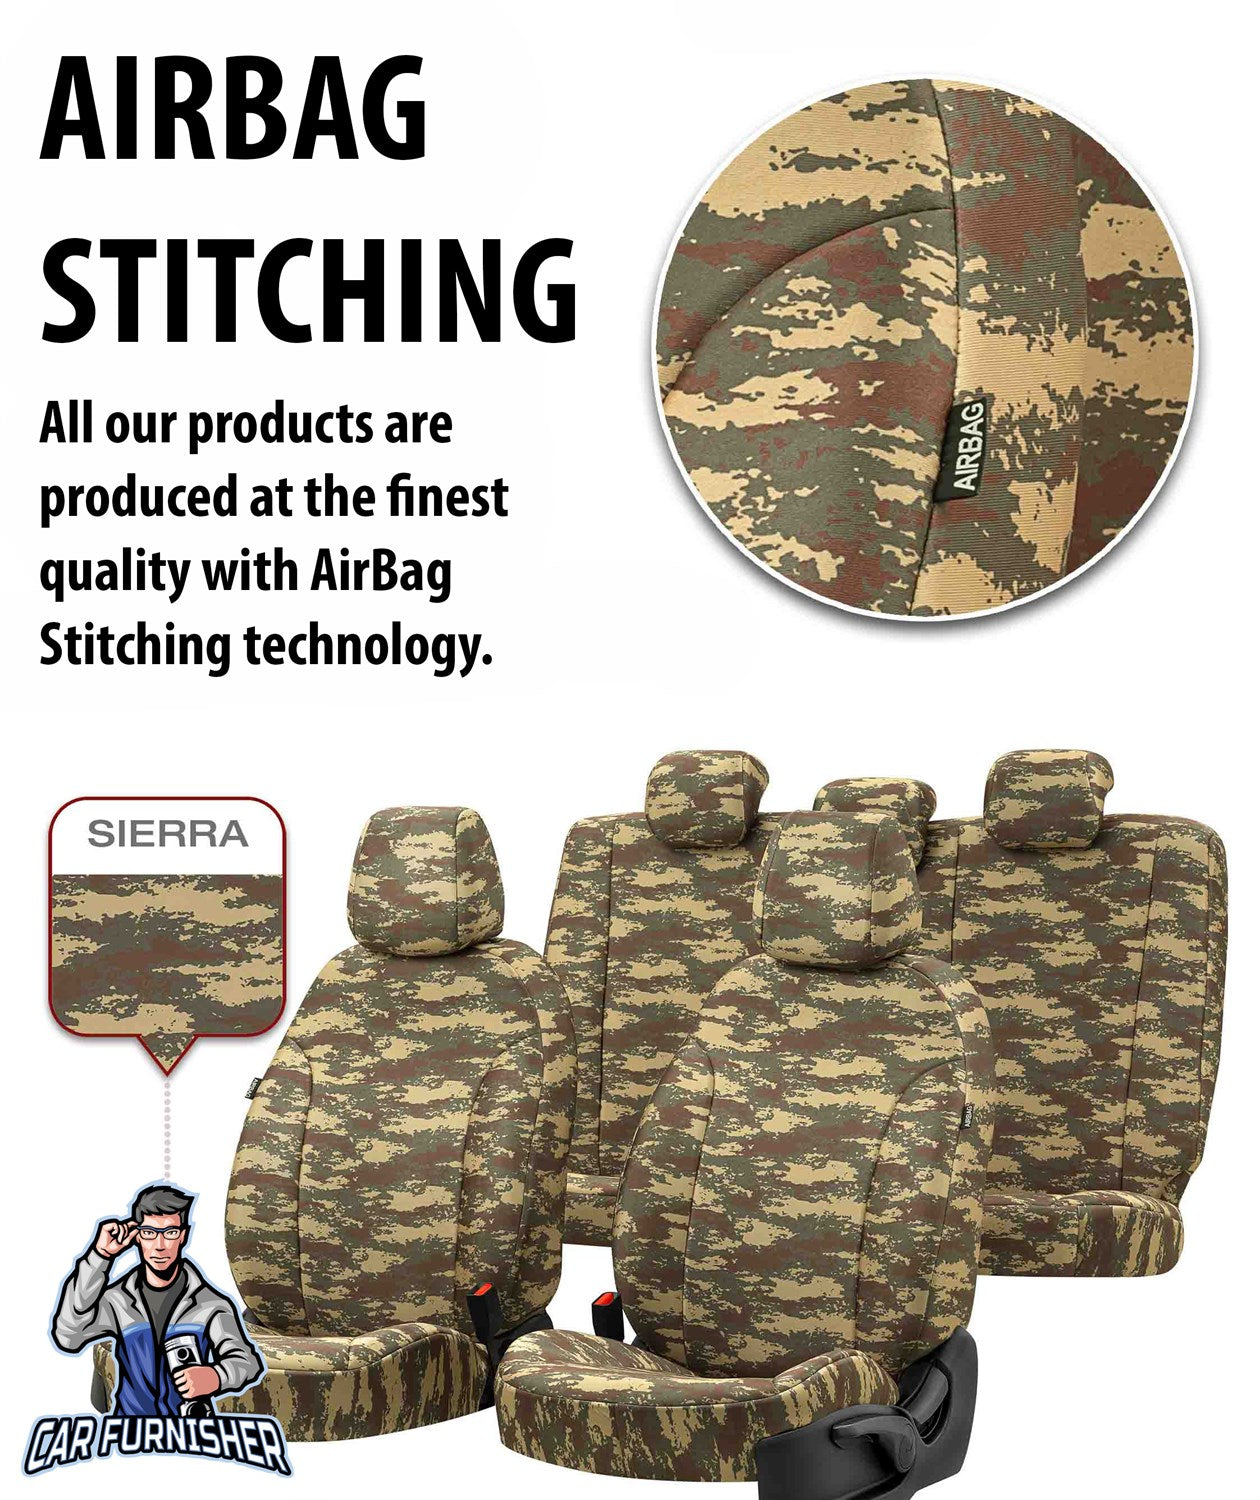 Ford Tourneo Courier Seat Covers Camouflage Waterproof Design Montblanc Camo Waterproof Fabric